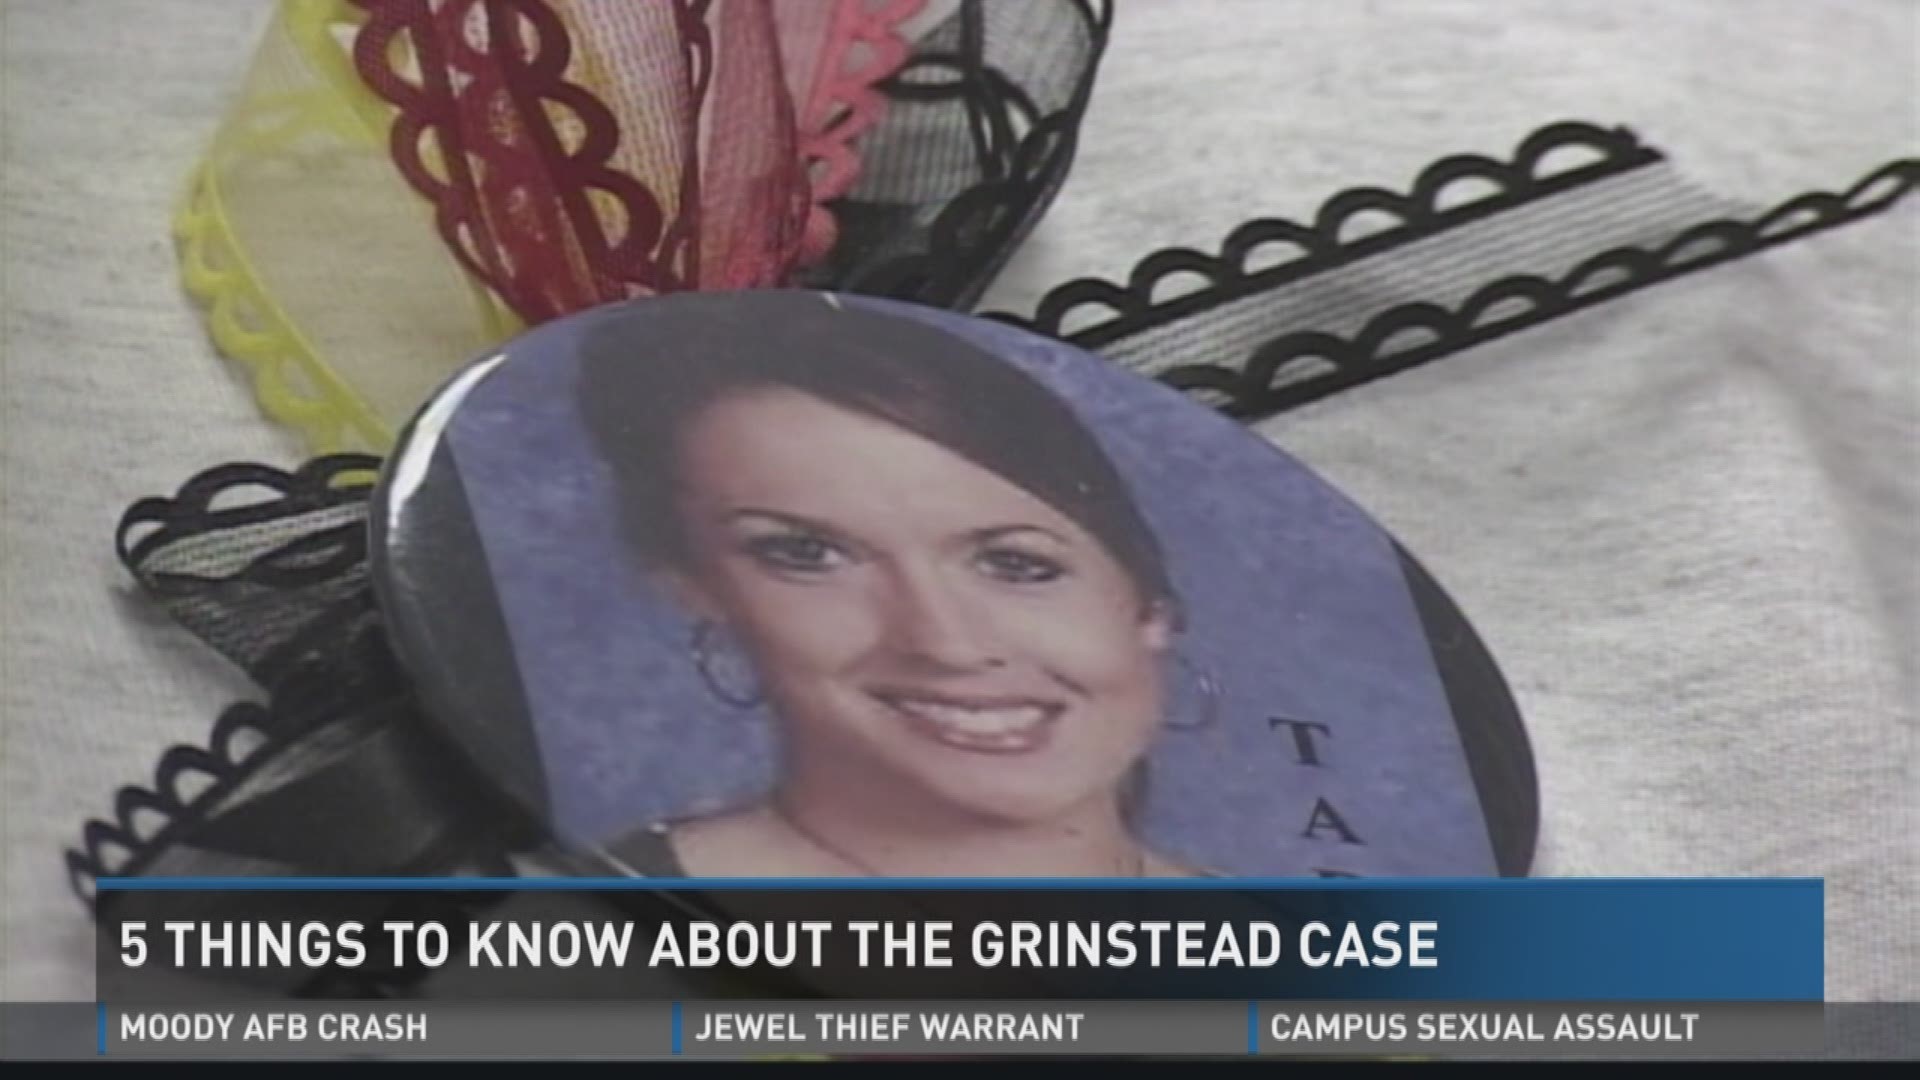 5 things to know about the Grinstead case